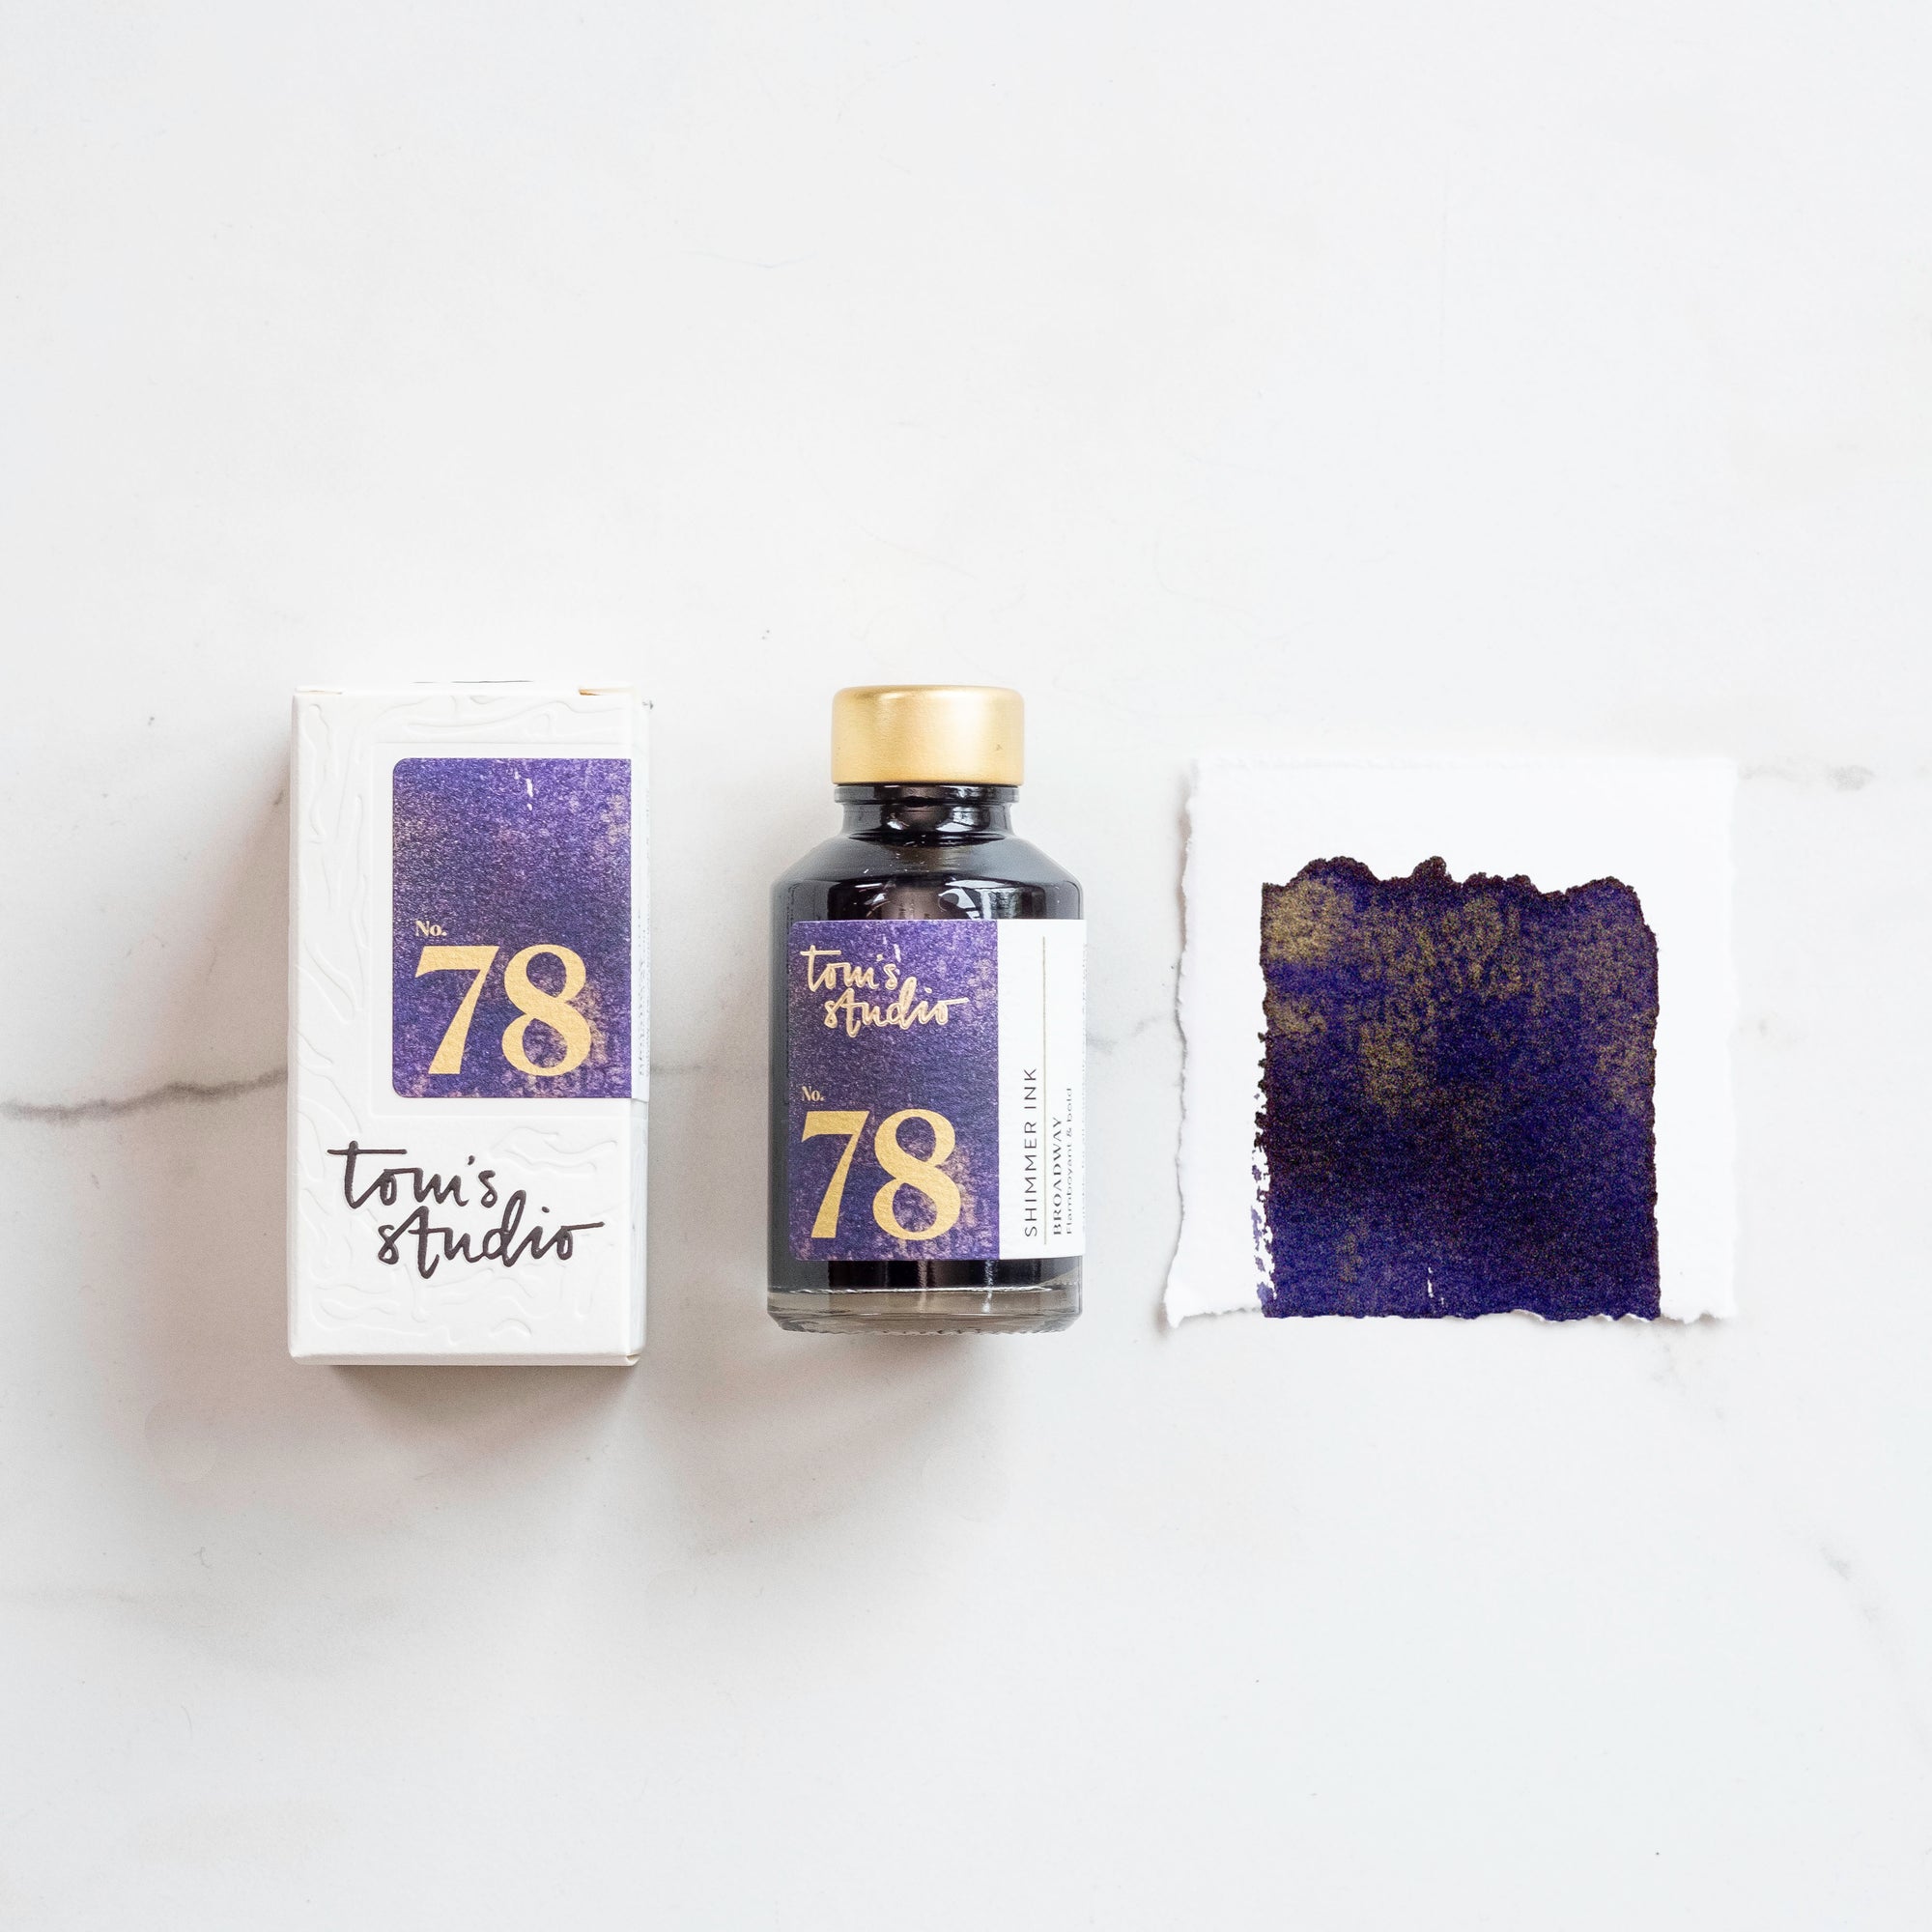 Tom's Studio Broadway Shimmer Fountain Pen Ink with two pens with inky goodness on paper with an ink swatch demonstrating the colour